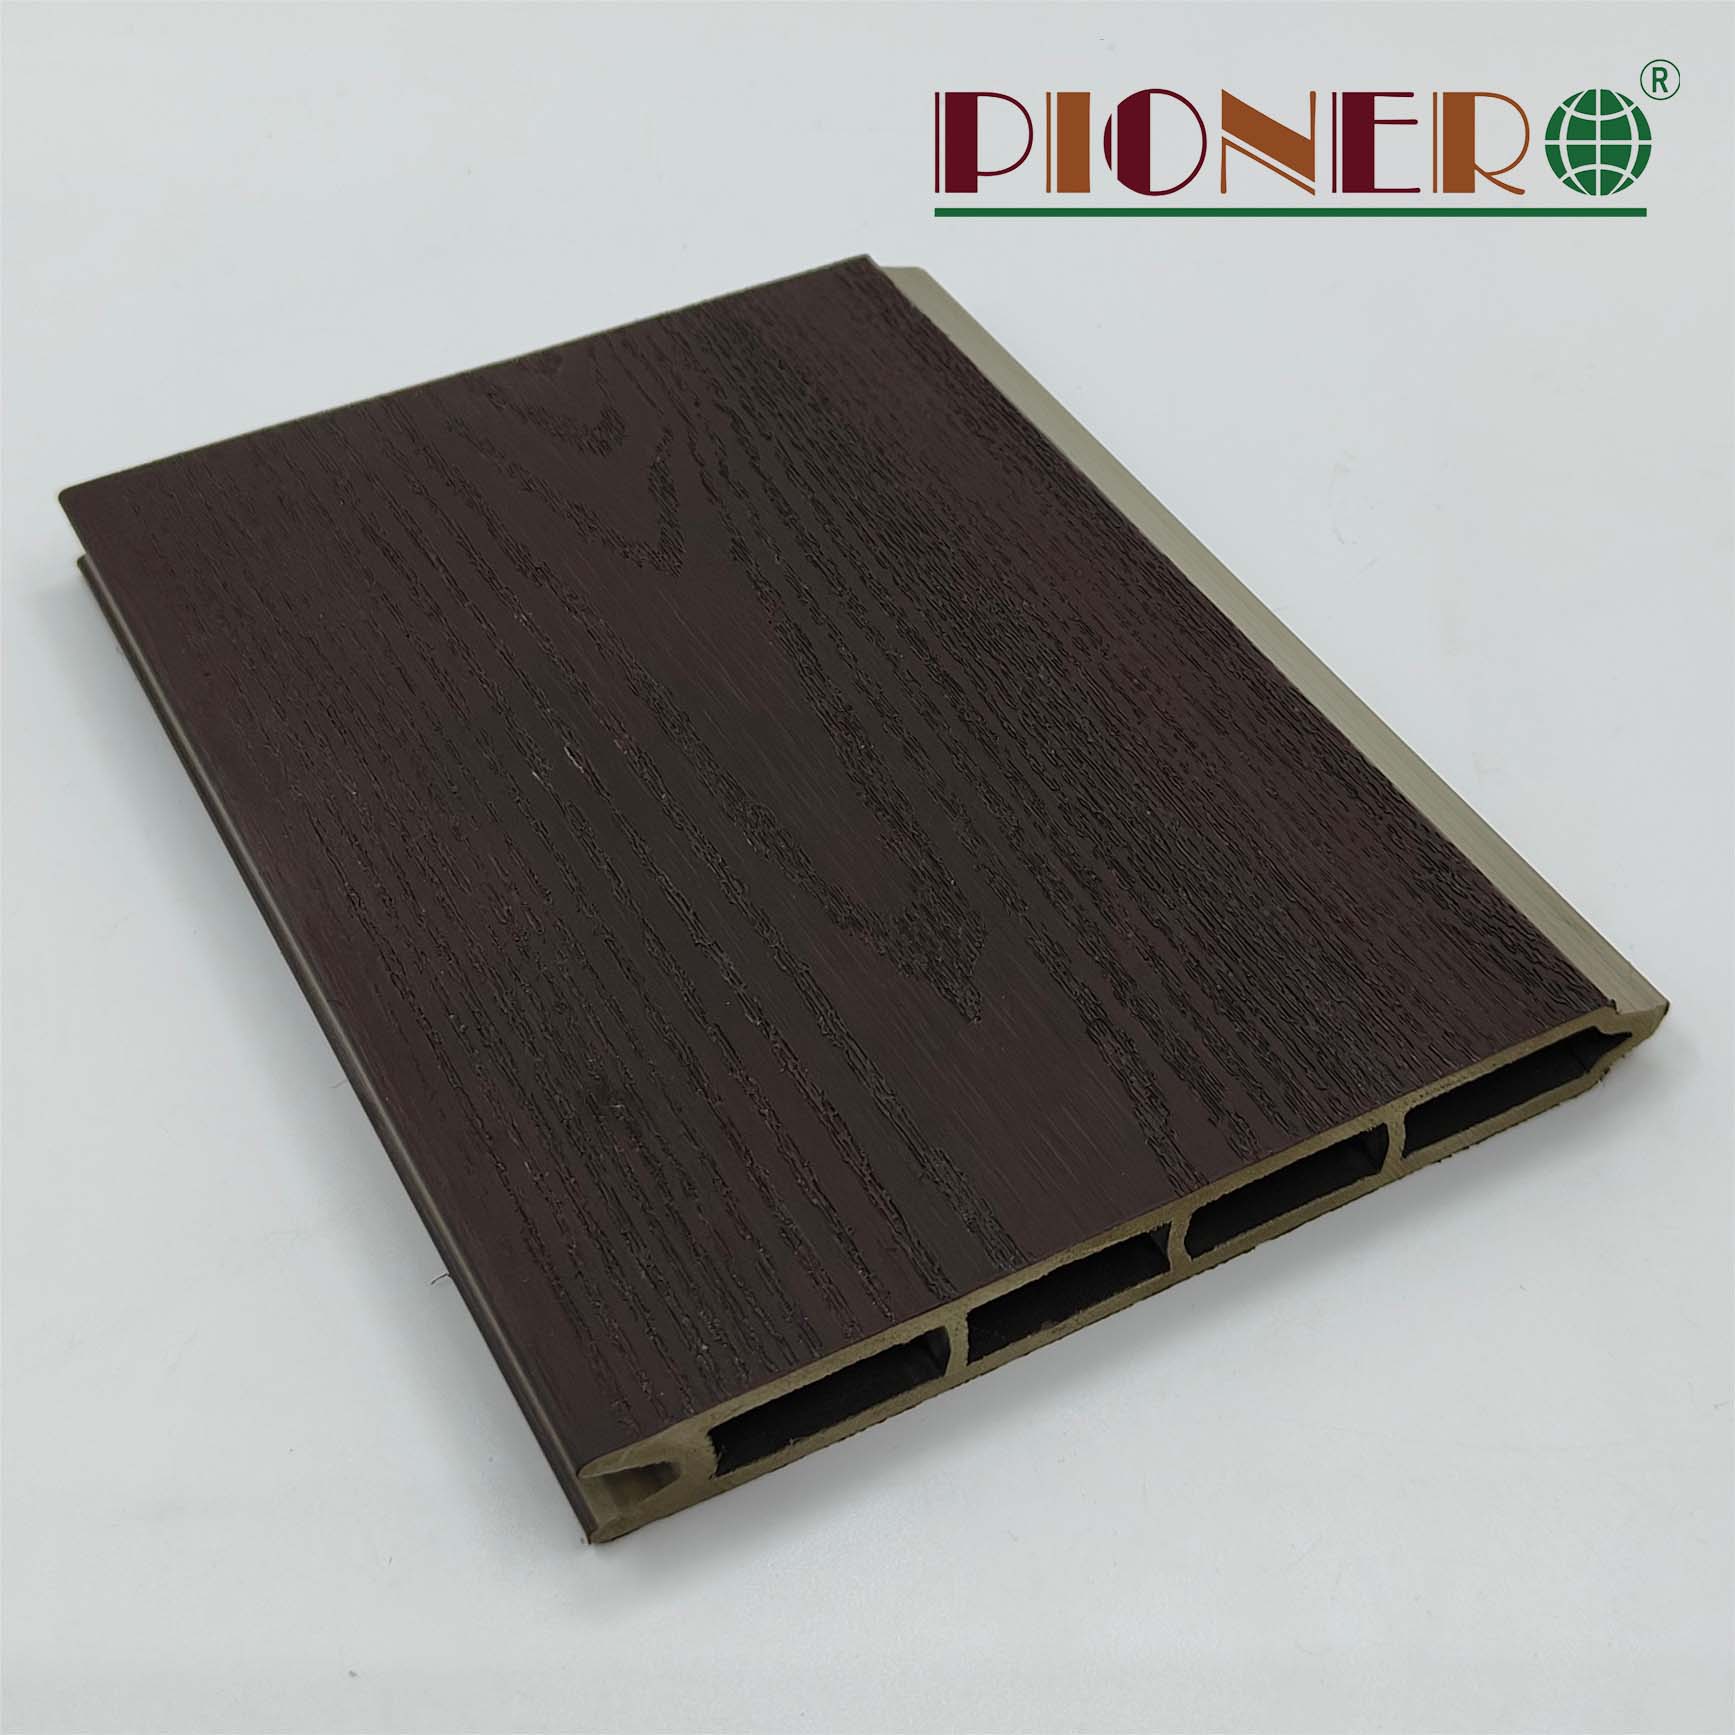 No Calcium Powder Added WPC Co-Extruded ASA Outdoor Fence Panels